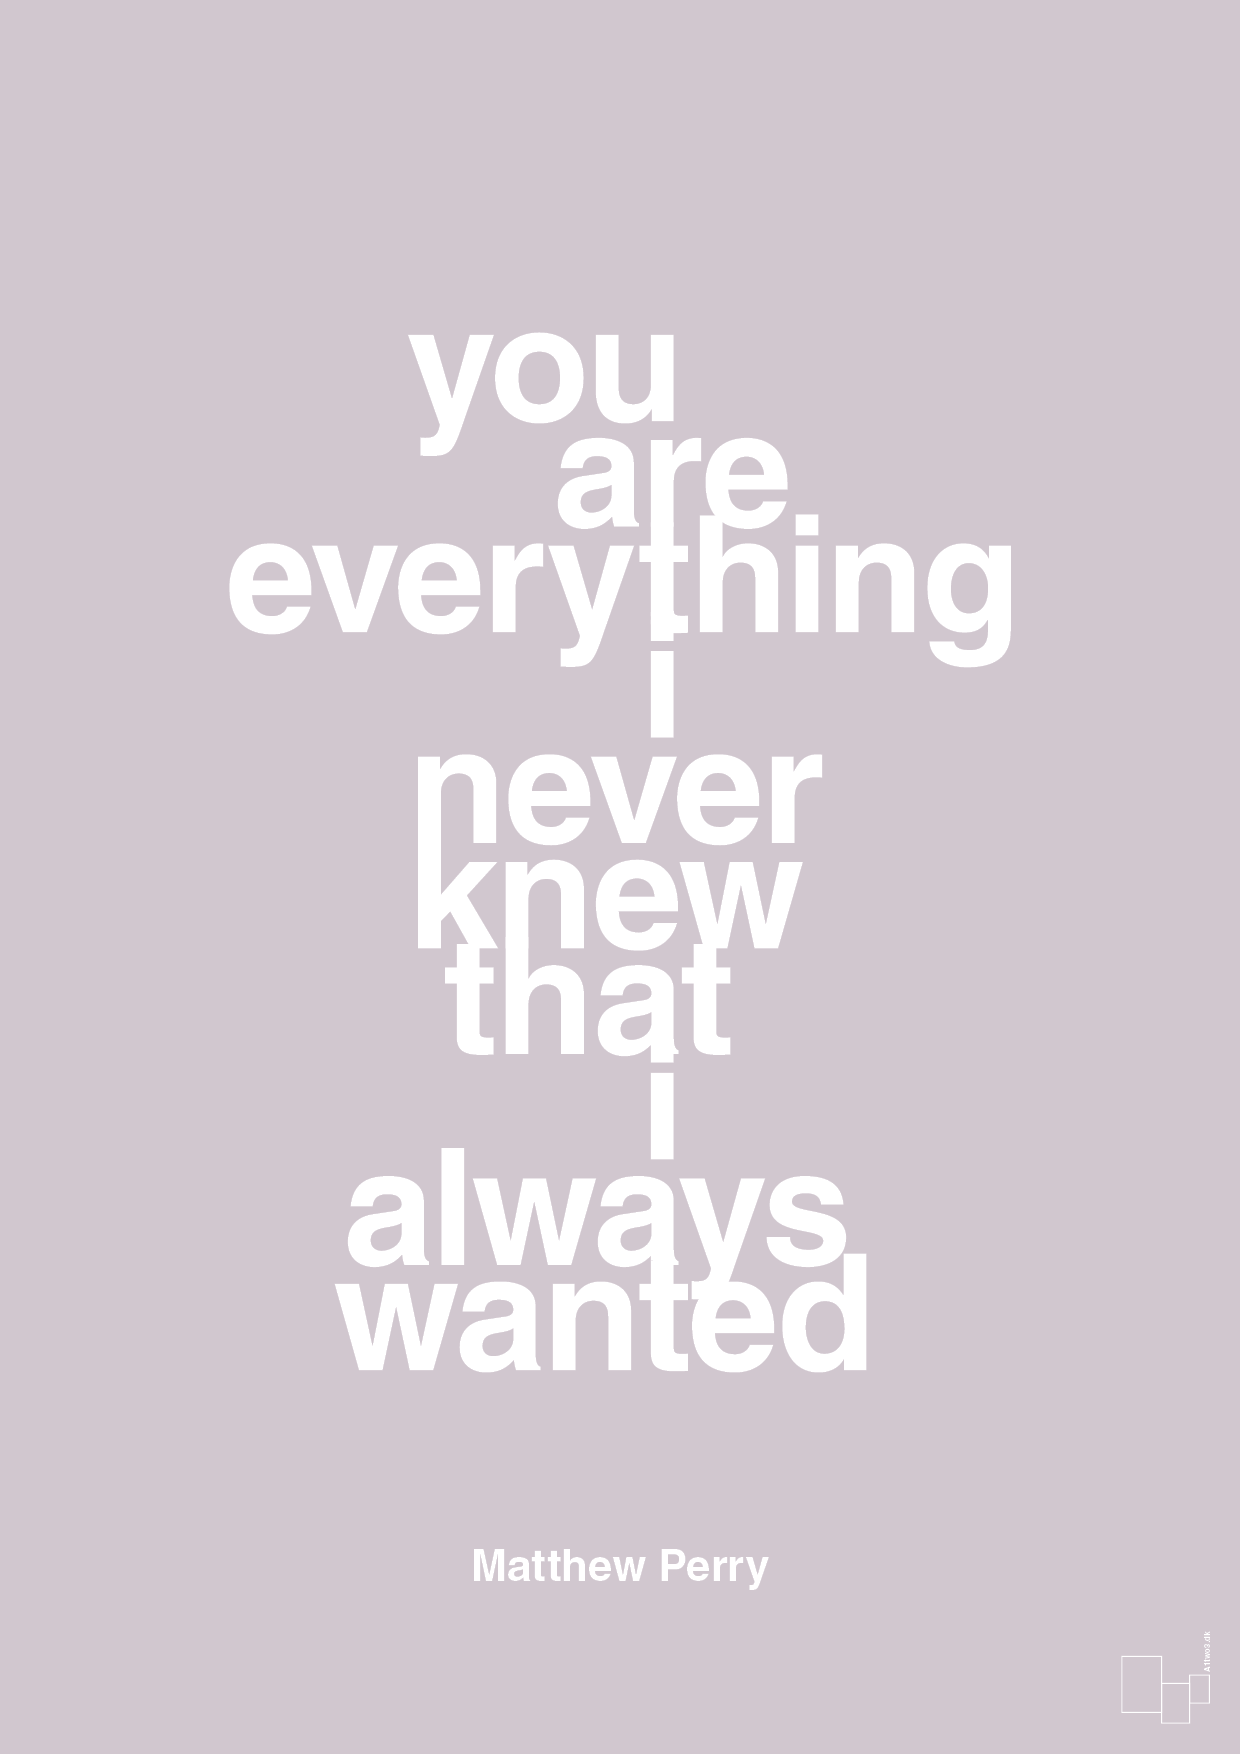 you are everything i never knew that i always wanted - Plakat med Citater i Dusty Lilac